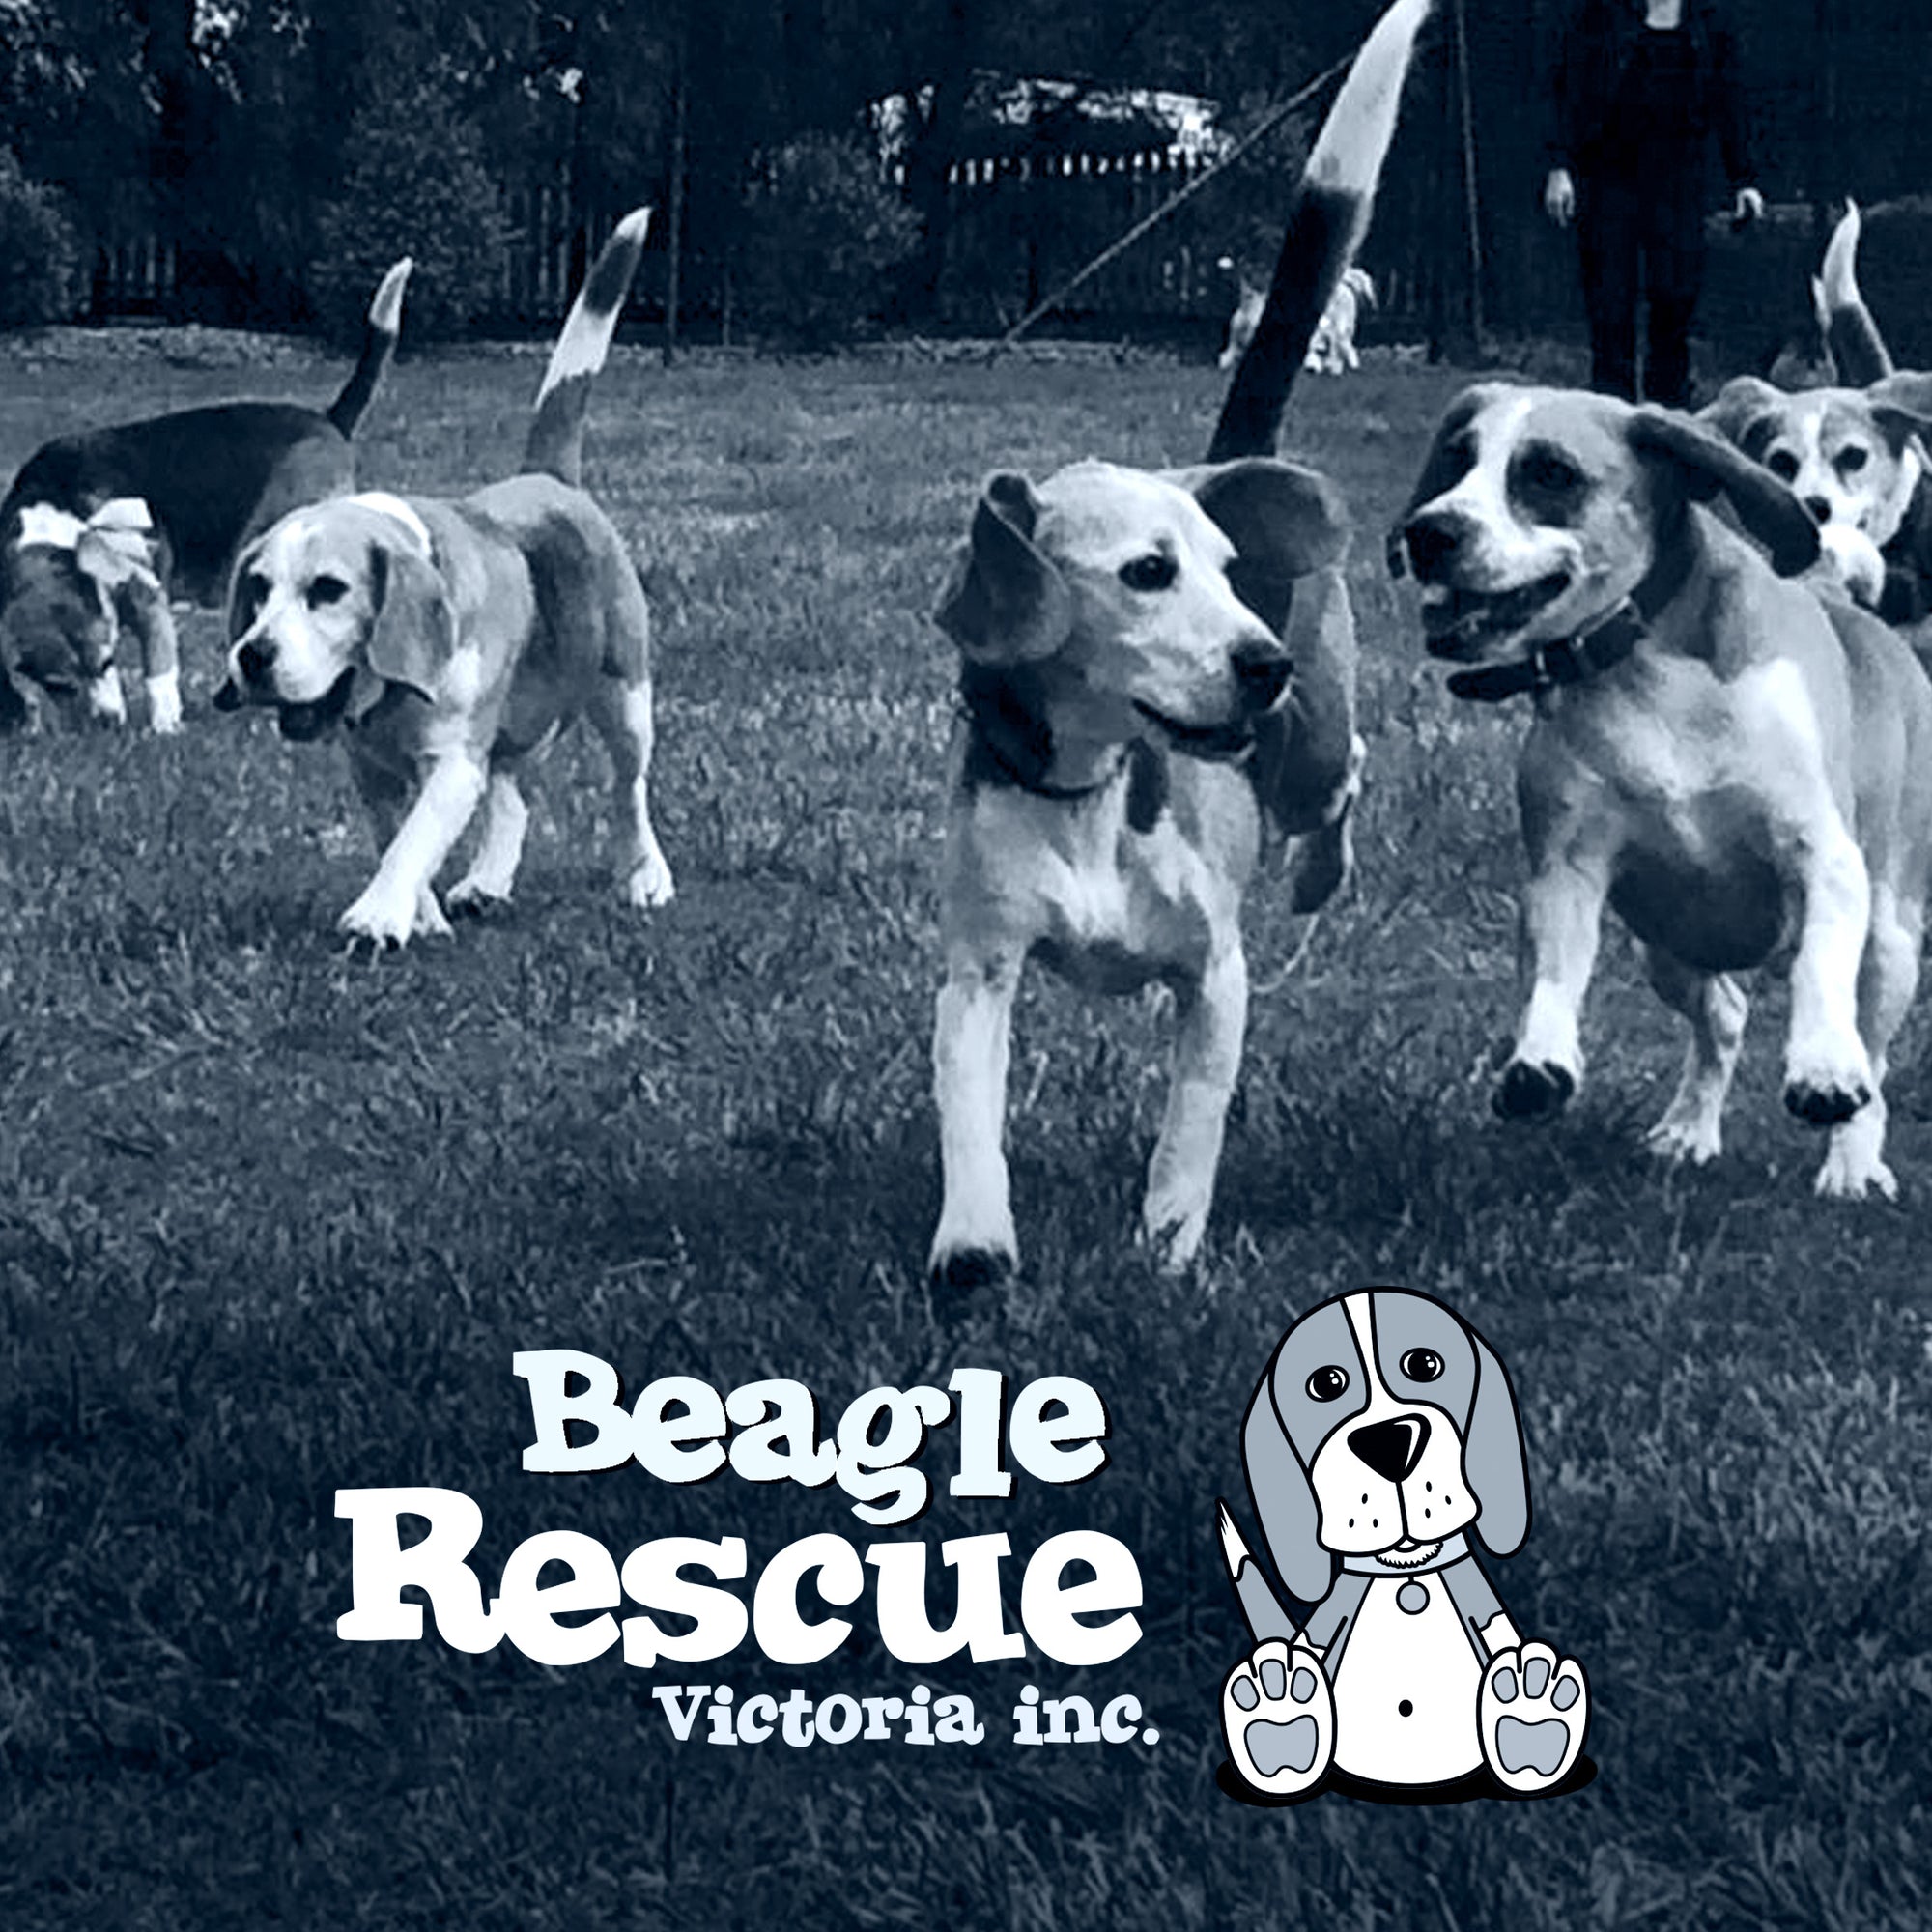 Beagle dogs running and playing at a beagle rescue charity event featuring the park barker heros oskar and darwin running with a toy